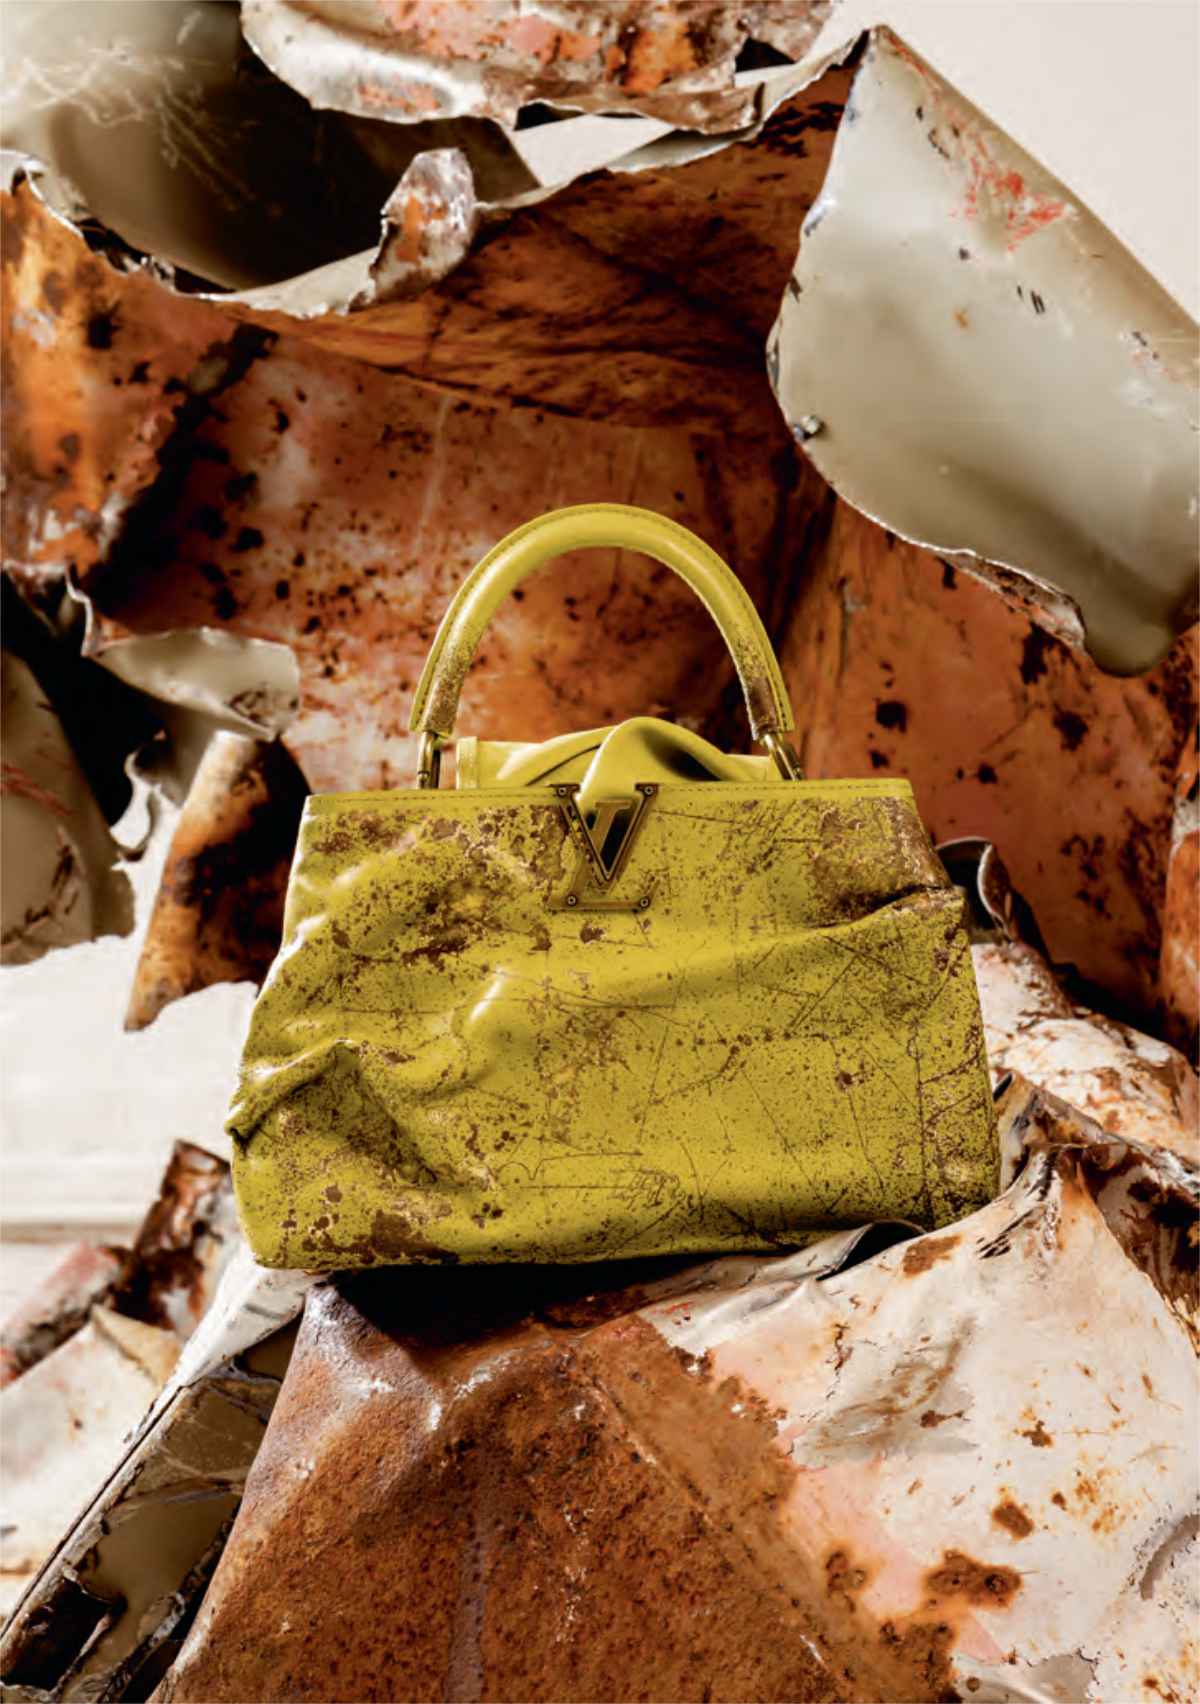 Louis Vuitton Presents Its New Artycapucines Collection